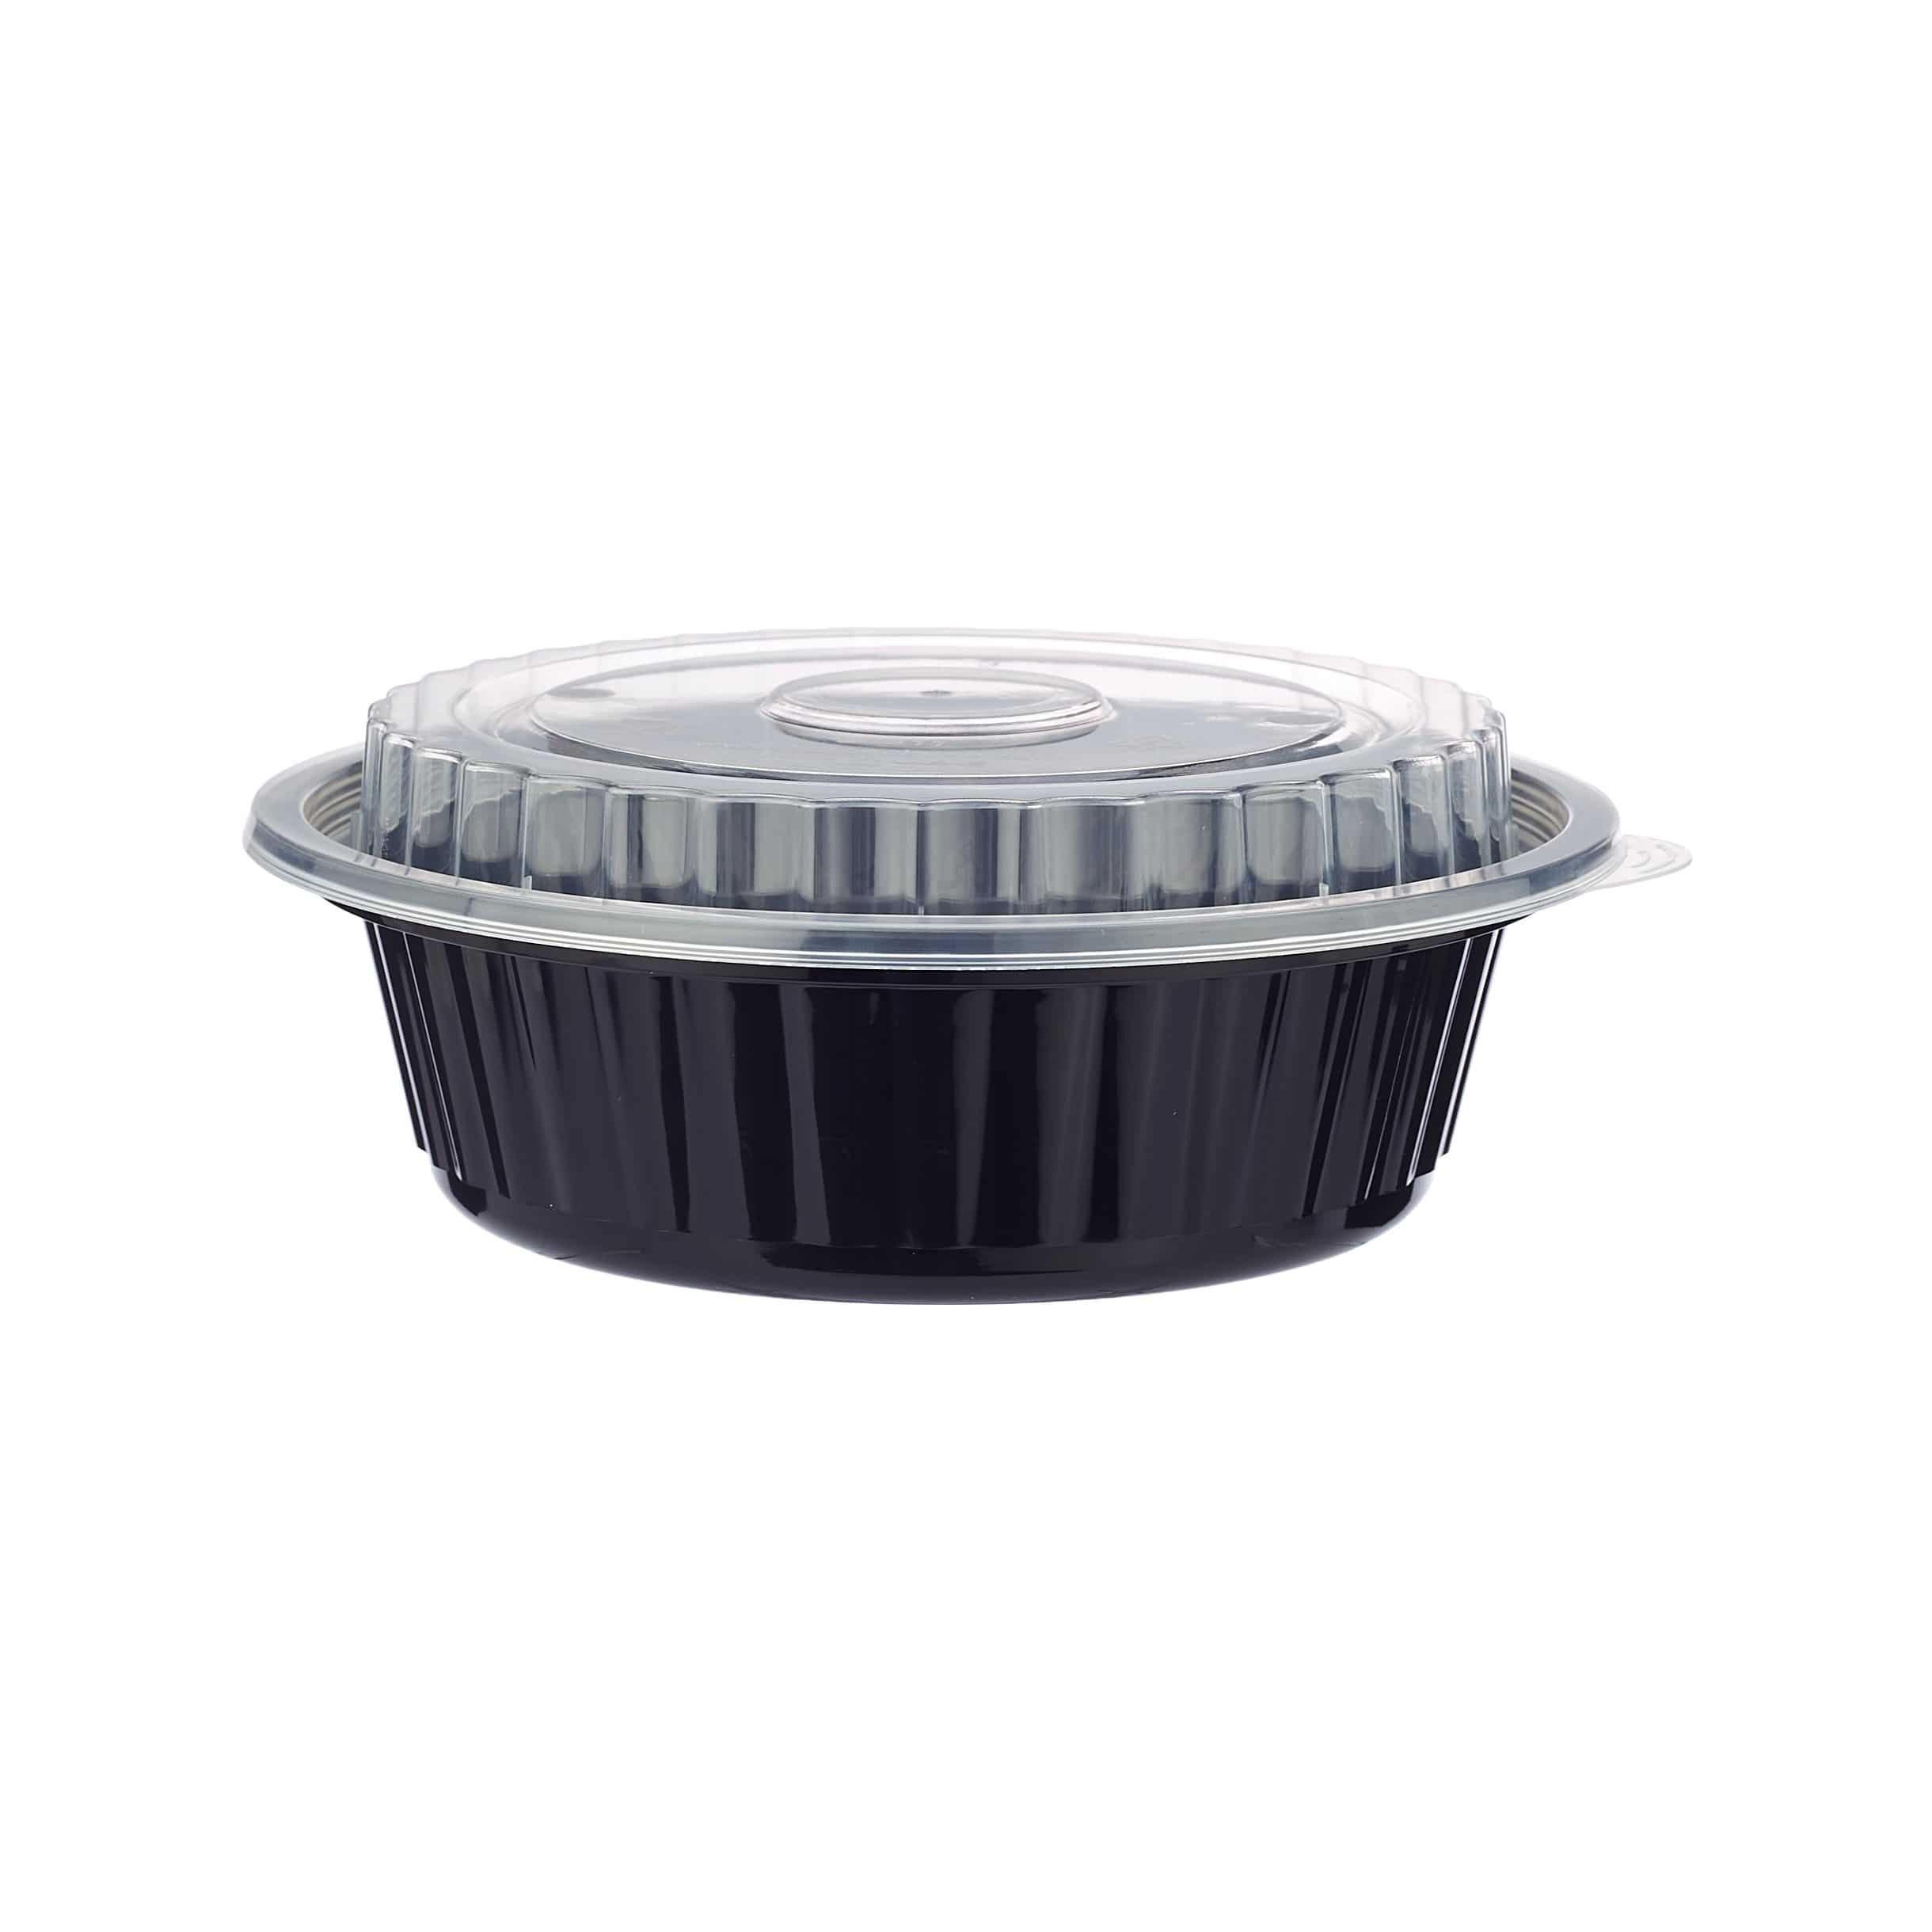 Black Base Round Container 16 oz with Lids 150 Pieces - Hotpack Global